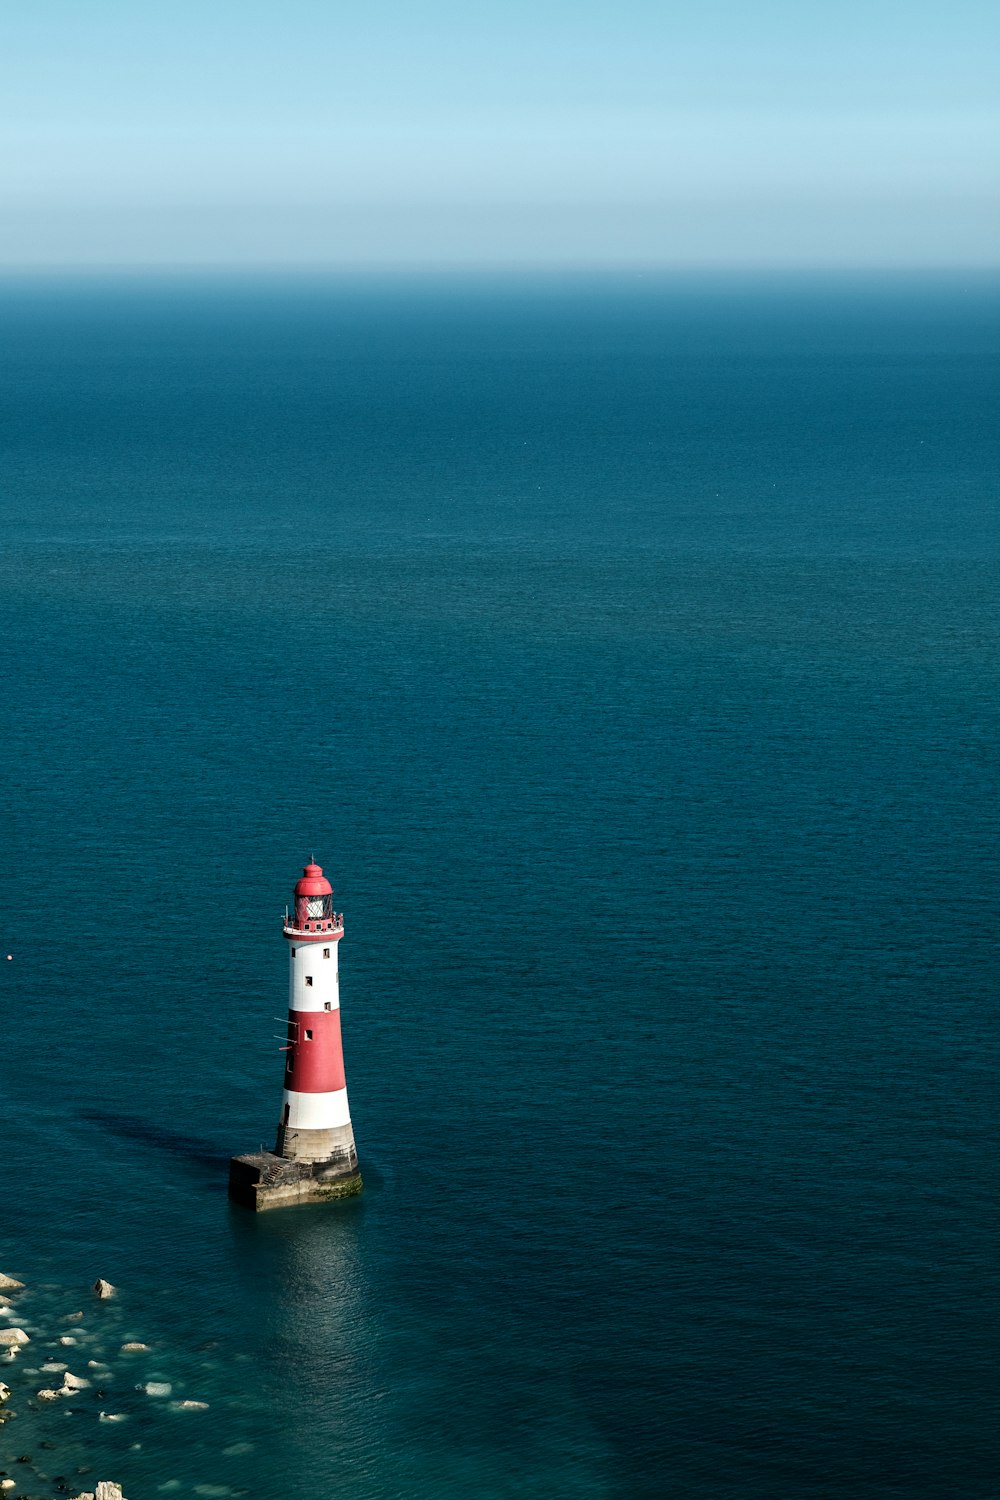 white and red lighthouse on the sea during daytime